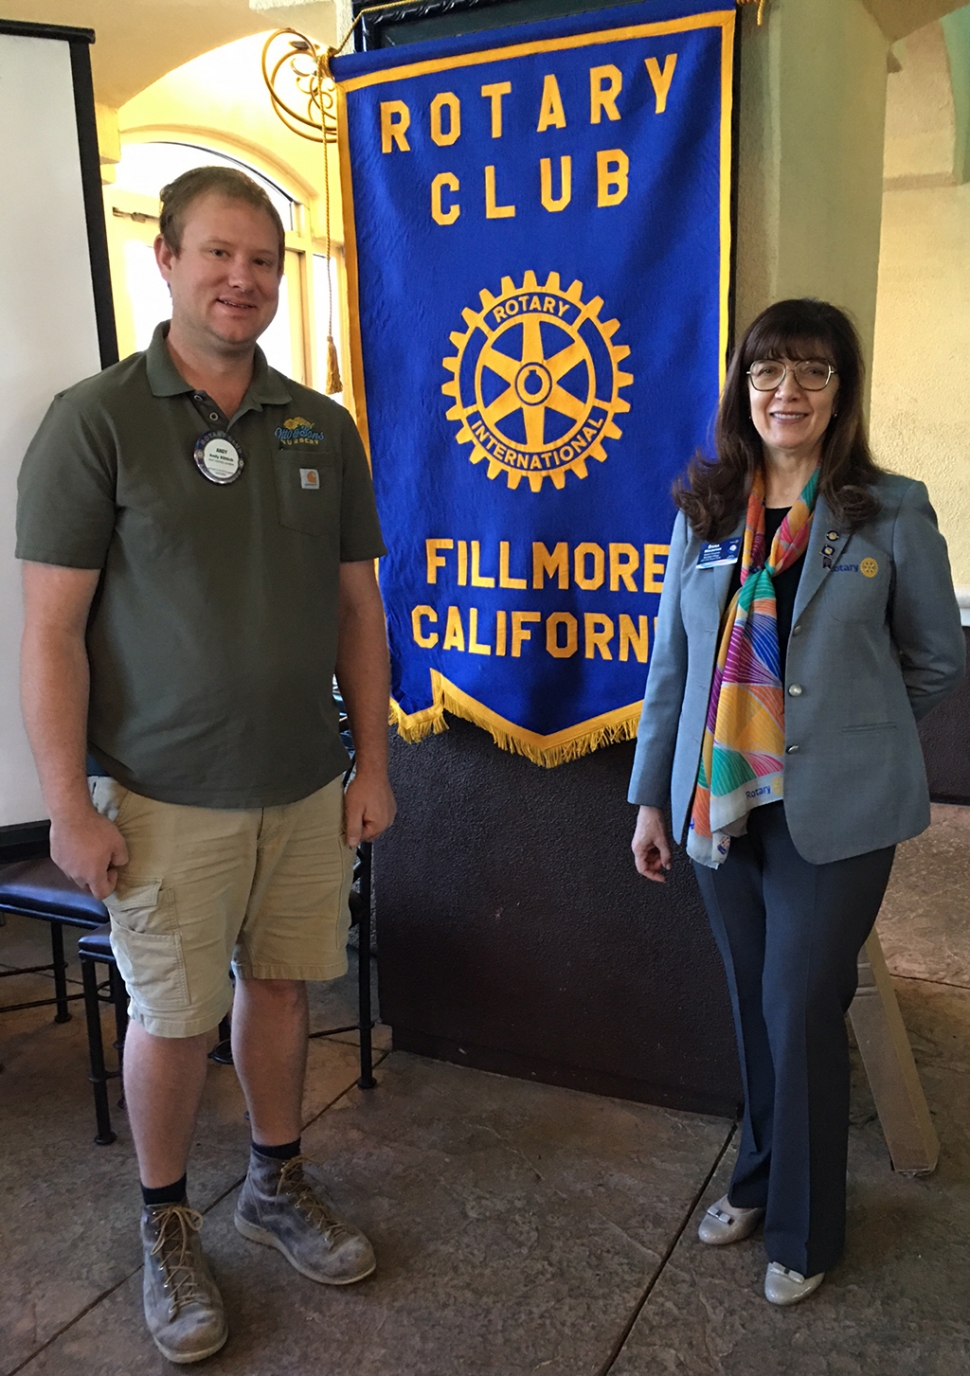 Rotary Club of Fillmore Meets District Governor Dana Moldovan